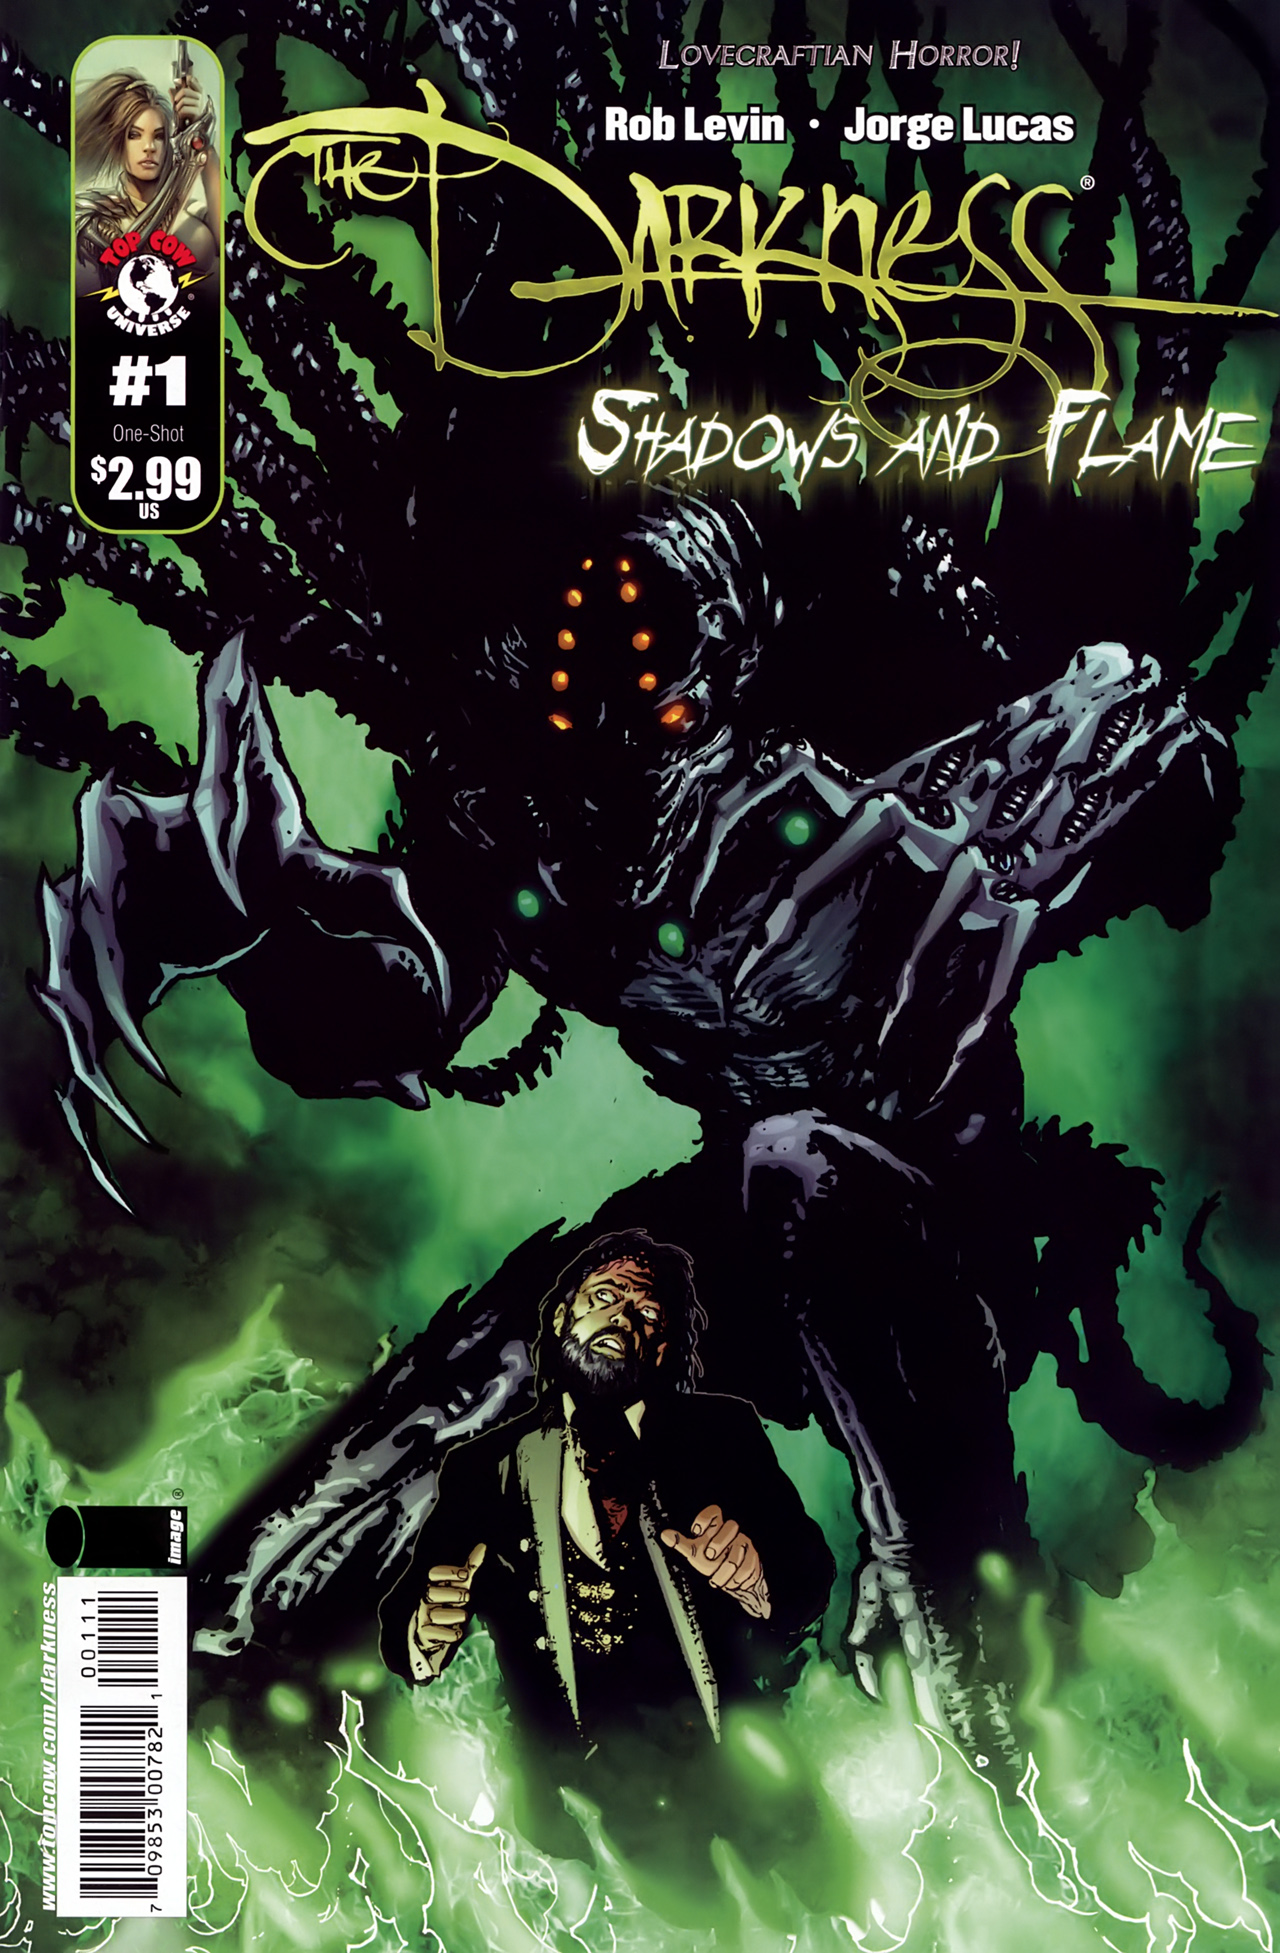 Read online The Darkness: Shadows & Flame comic -  Issue # Full - 1